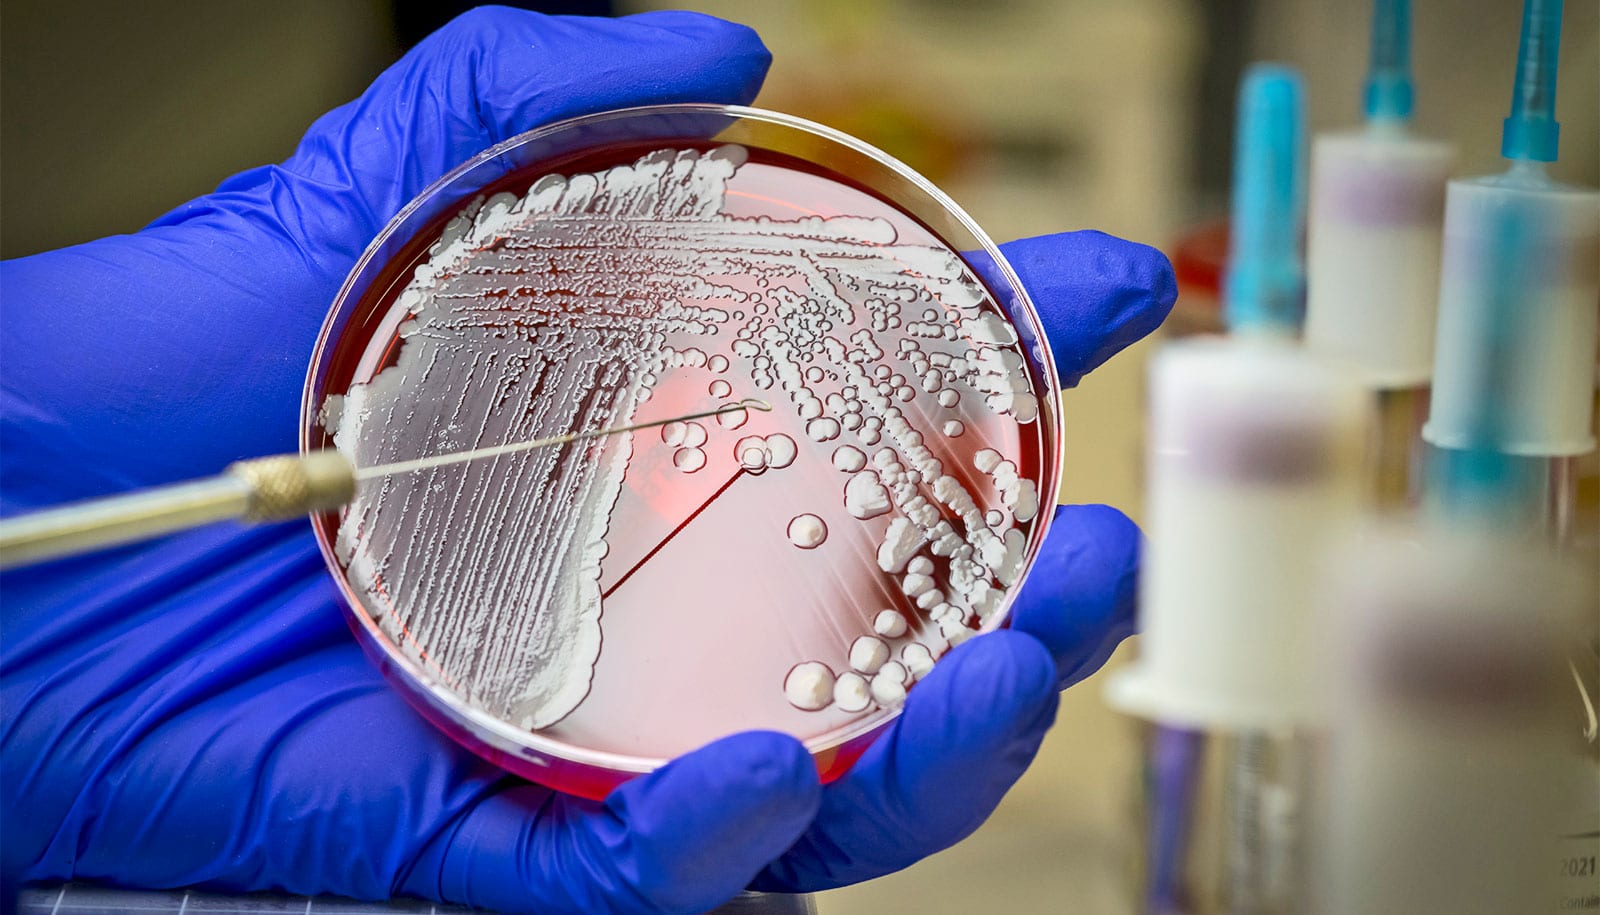 A person wearing a blue glove holds a petri dish with MRSA in it.